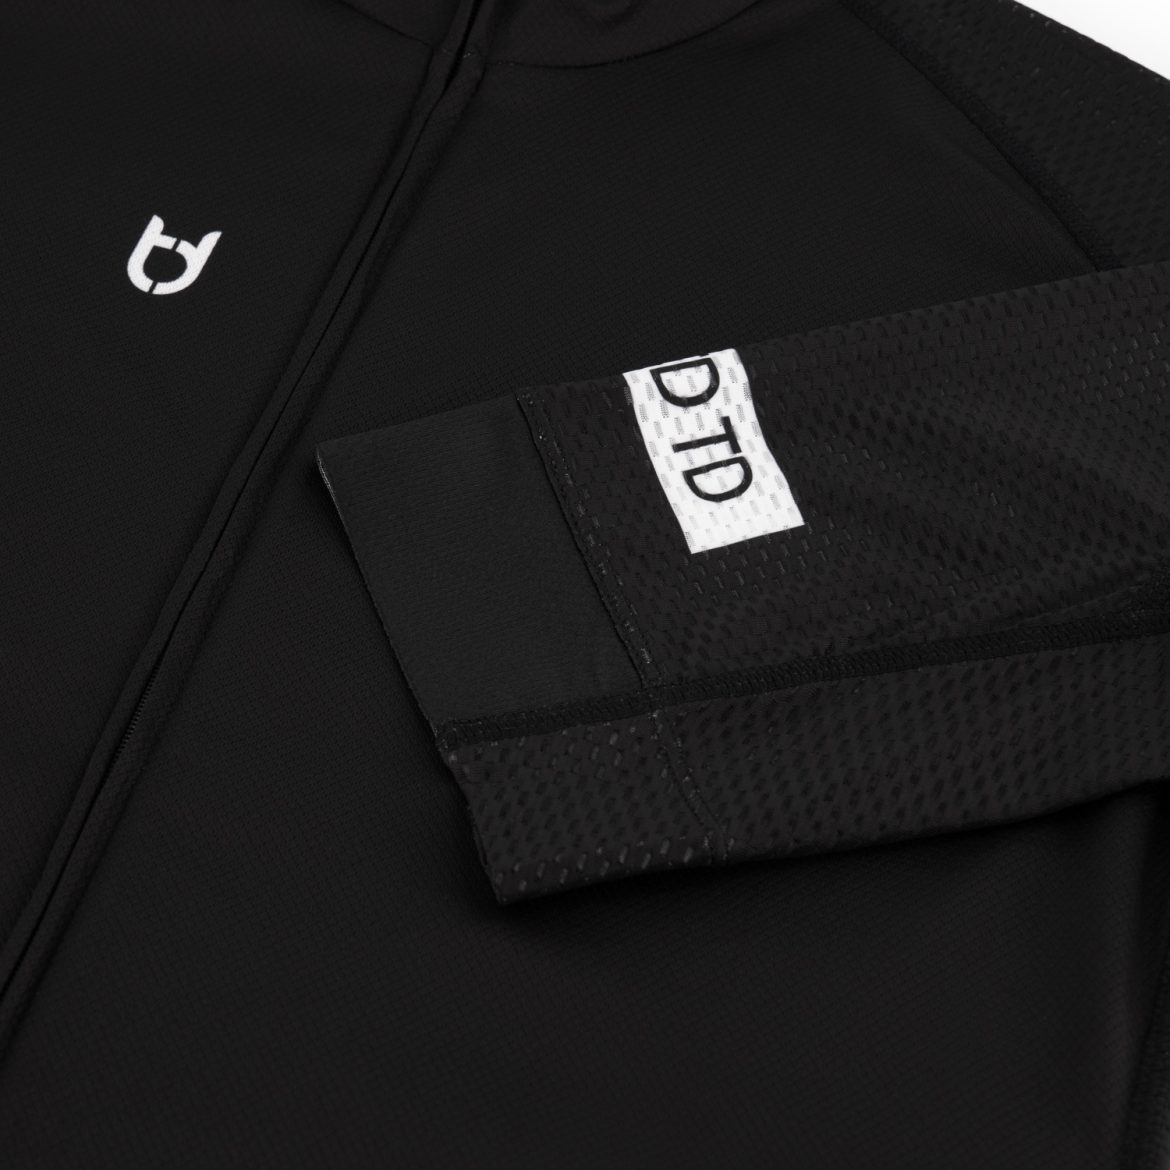 black sleeves detail photo black cycling jersey short sleeves from TD